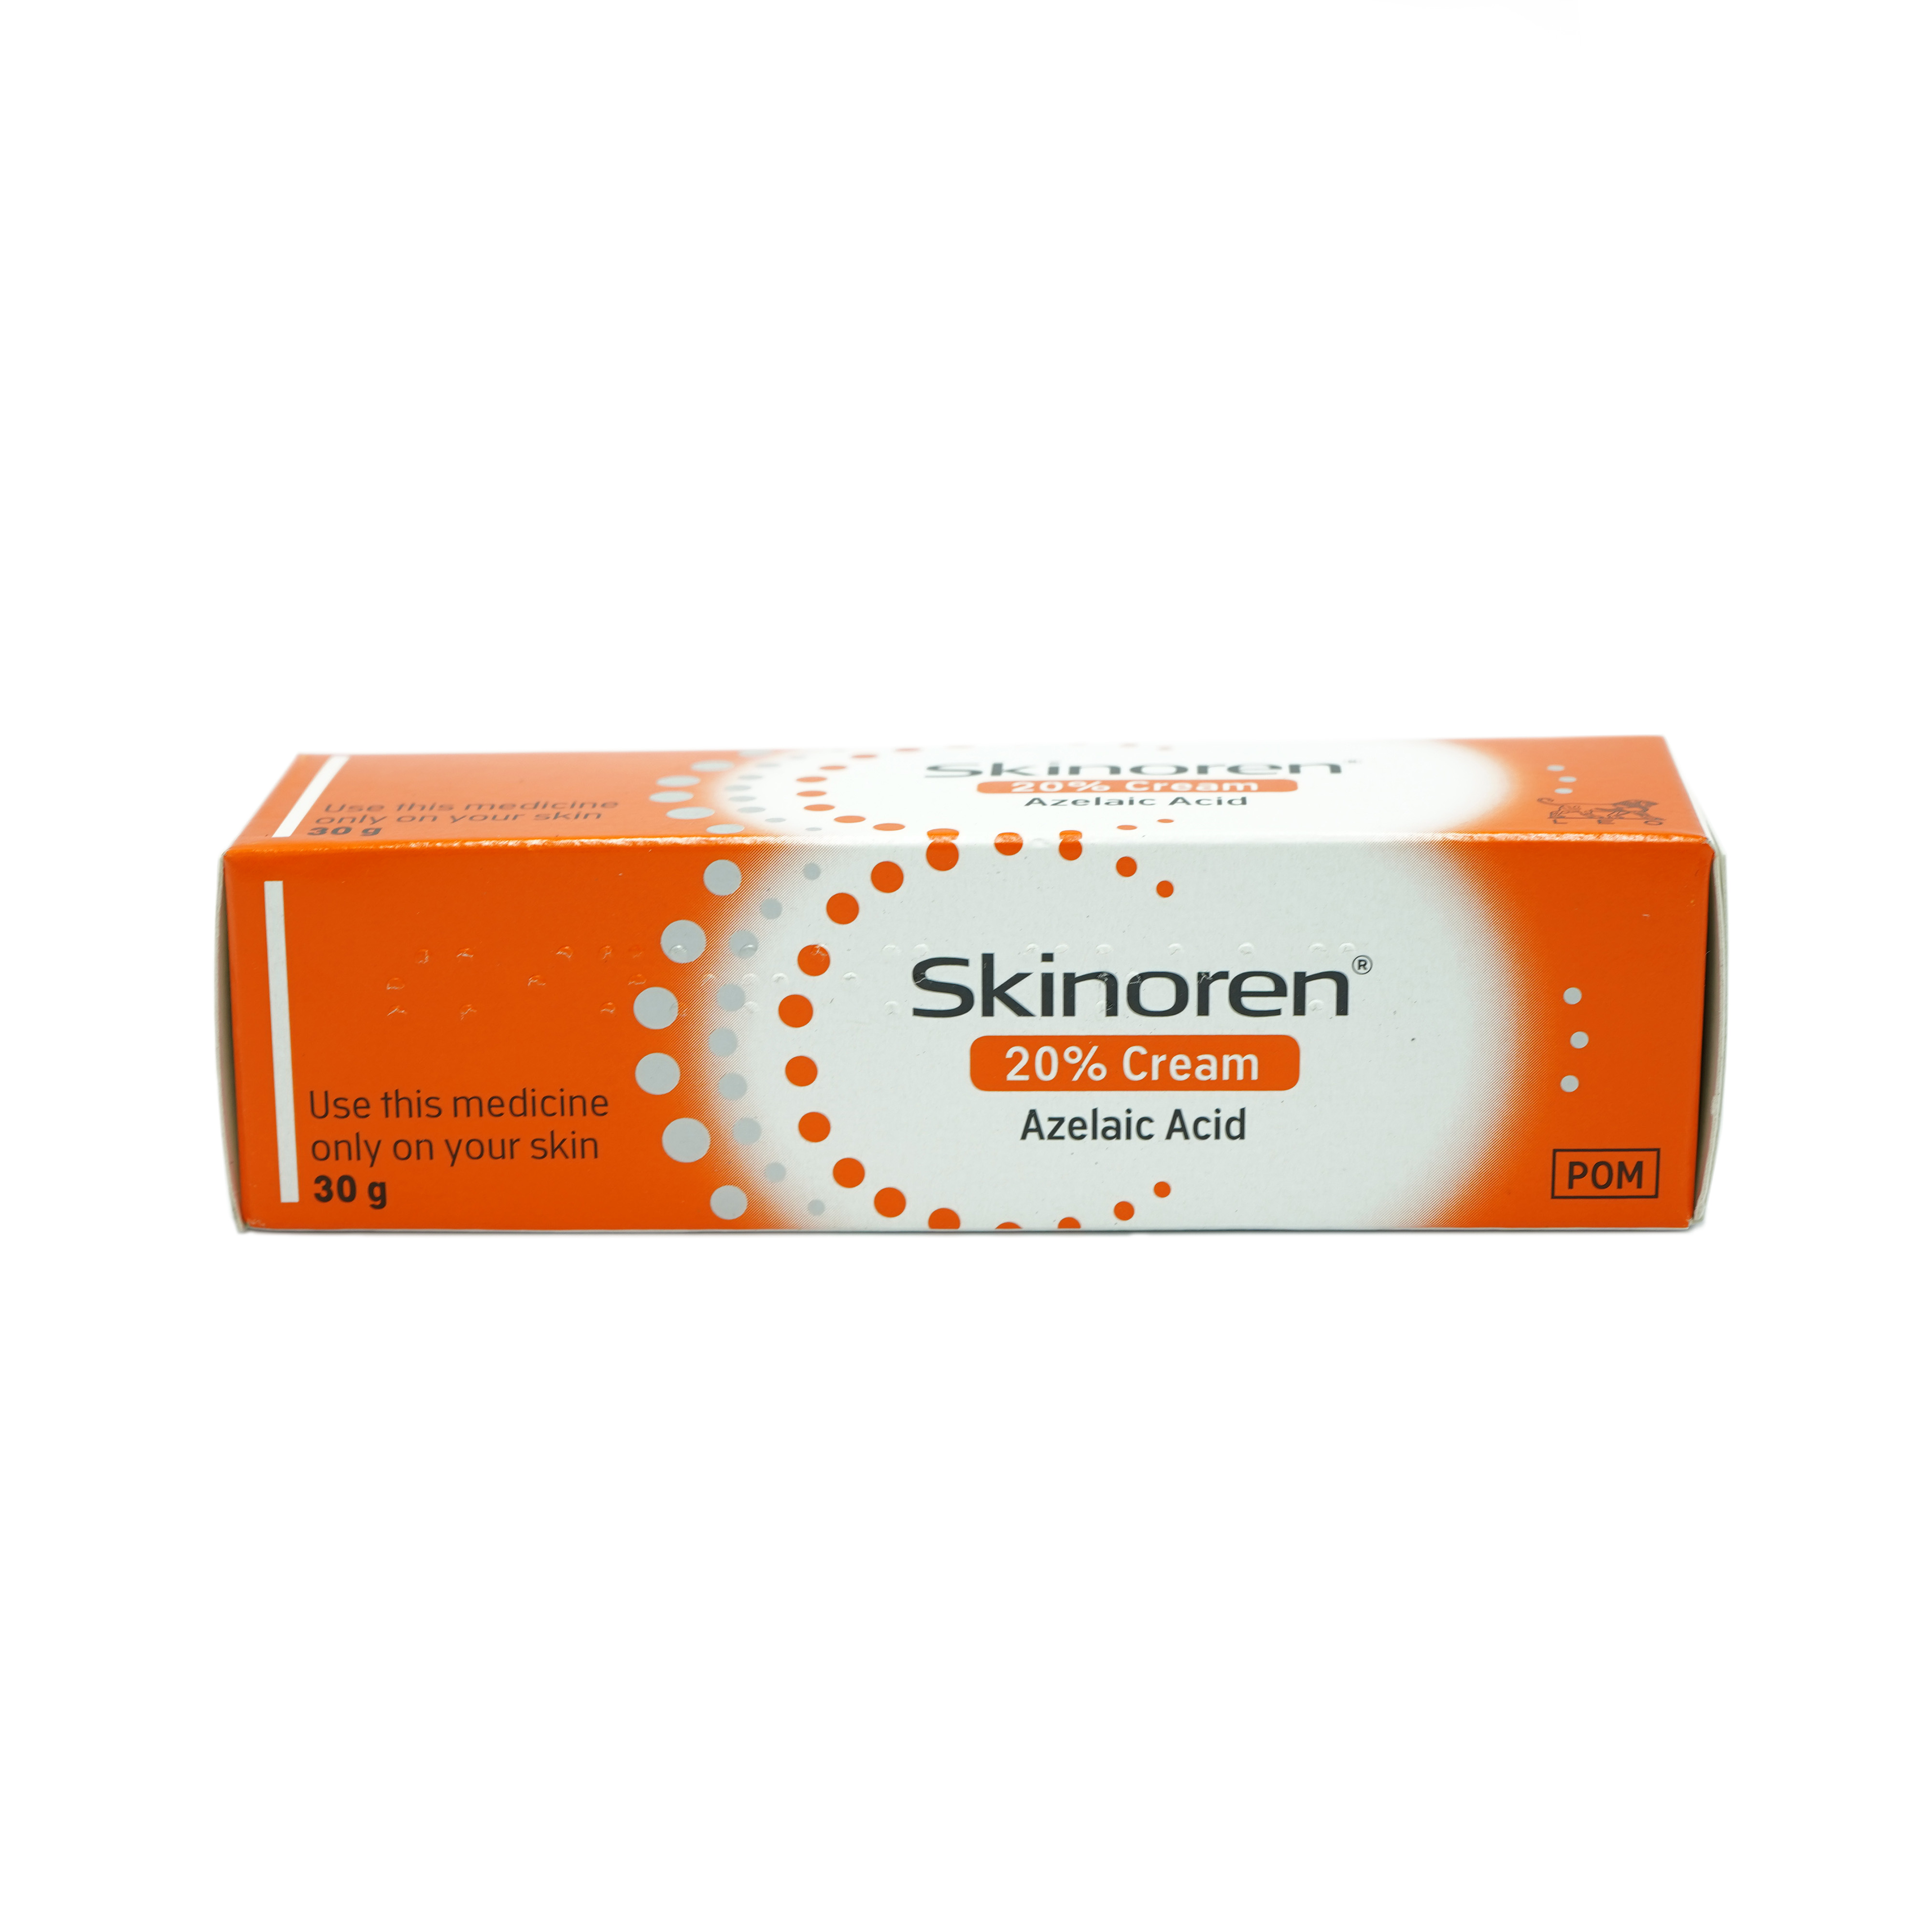 The front of a box of Skinoren treatment for acne